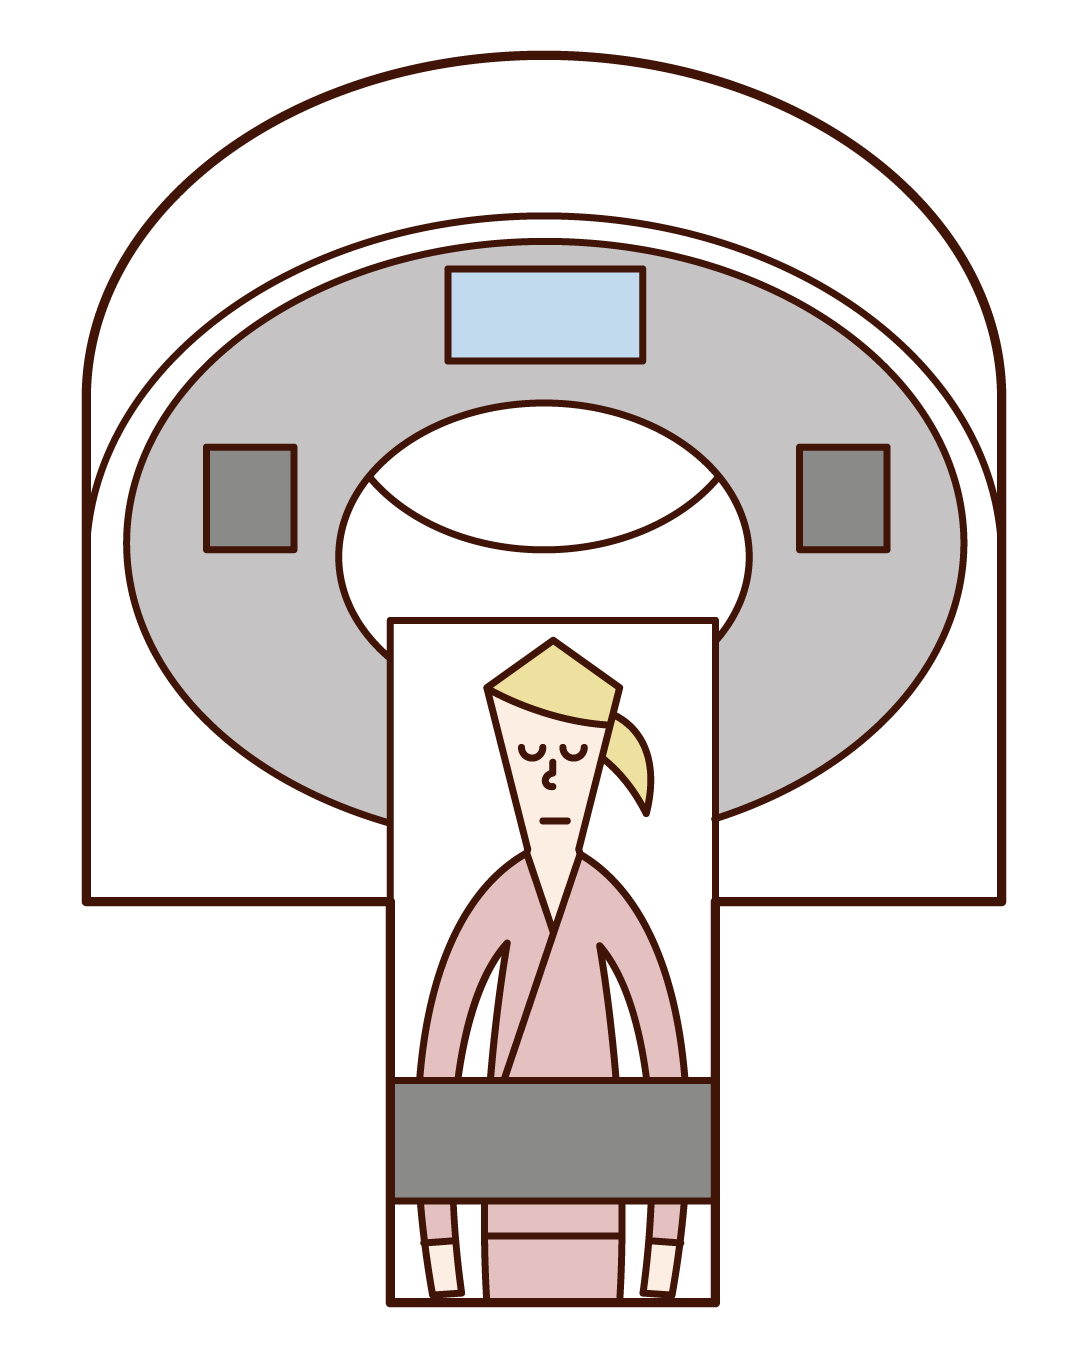 Illustration of a woman undergoing CT and PET tests